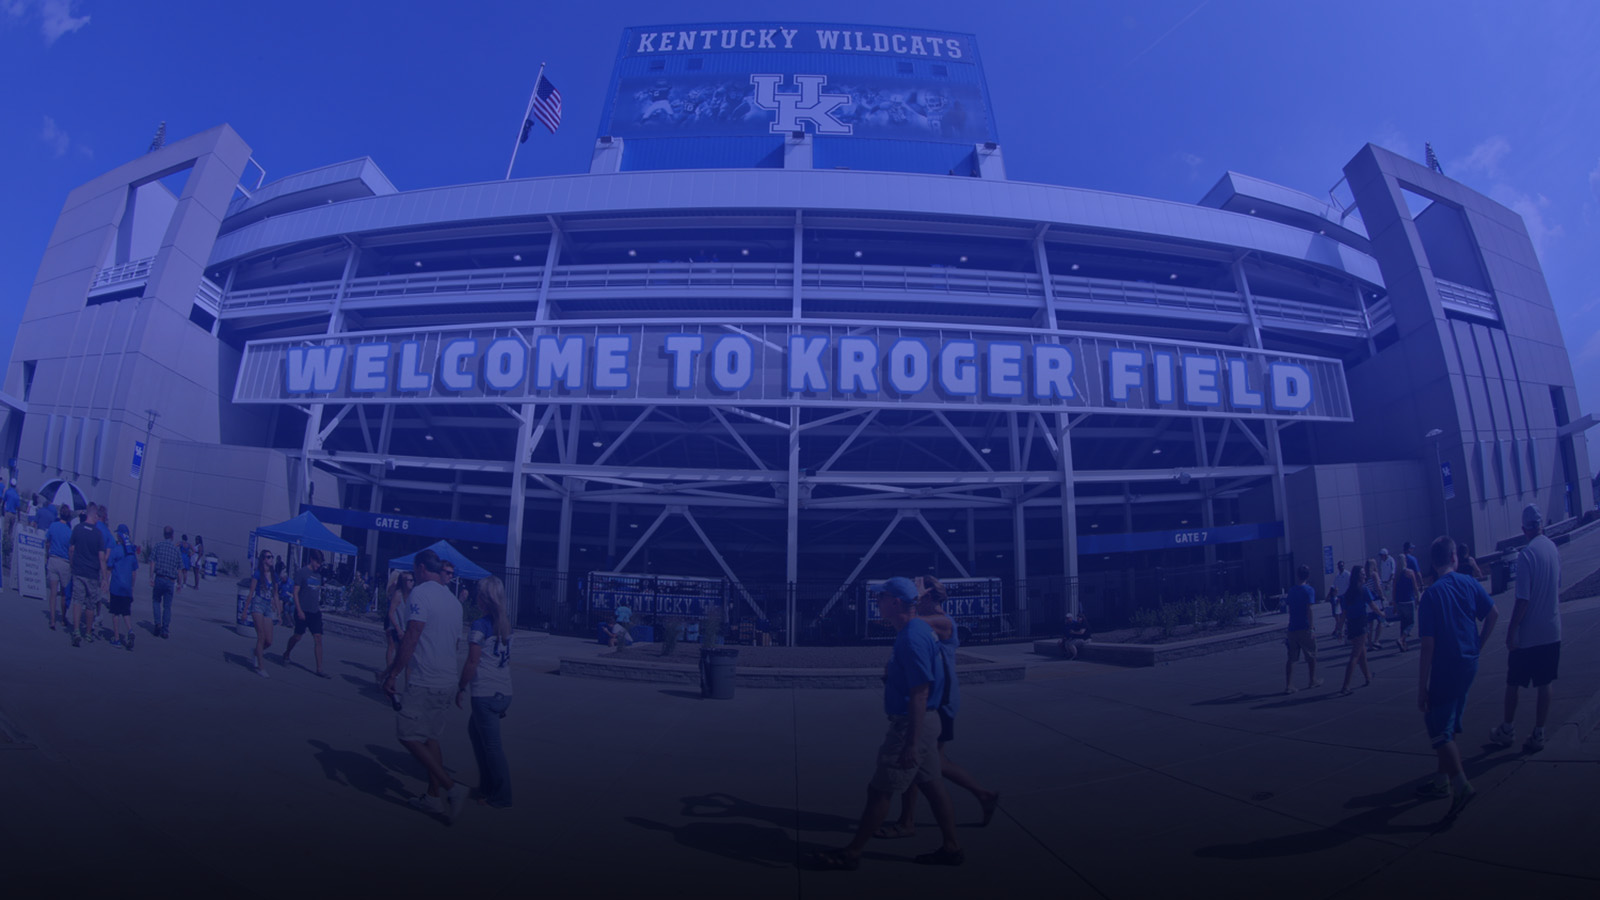 Important Ticket Safety Reminders for 2023 Kentucky Football